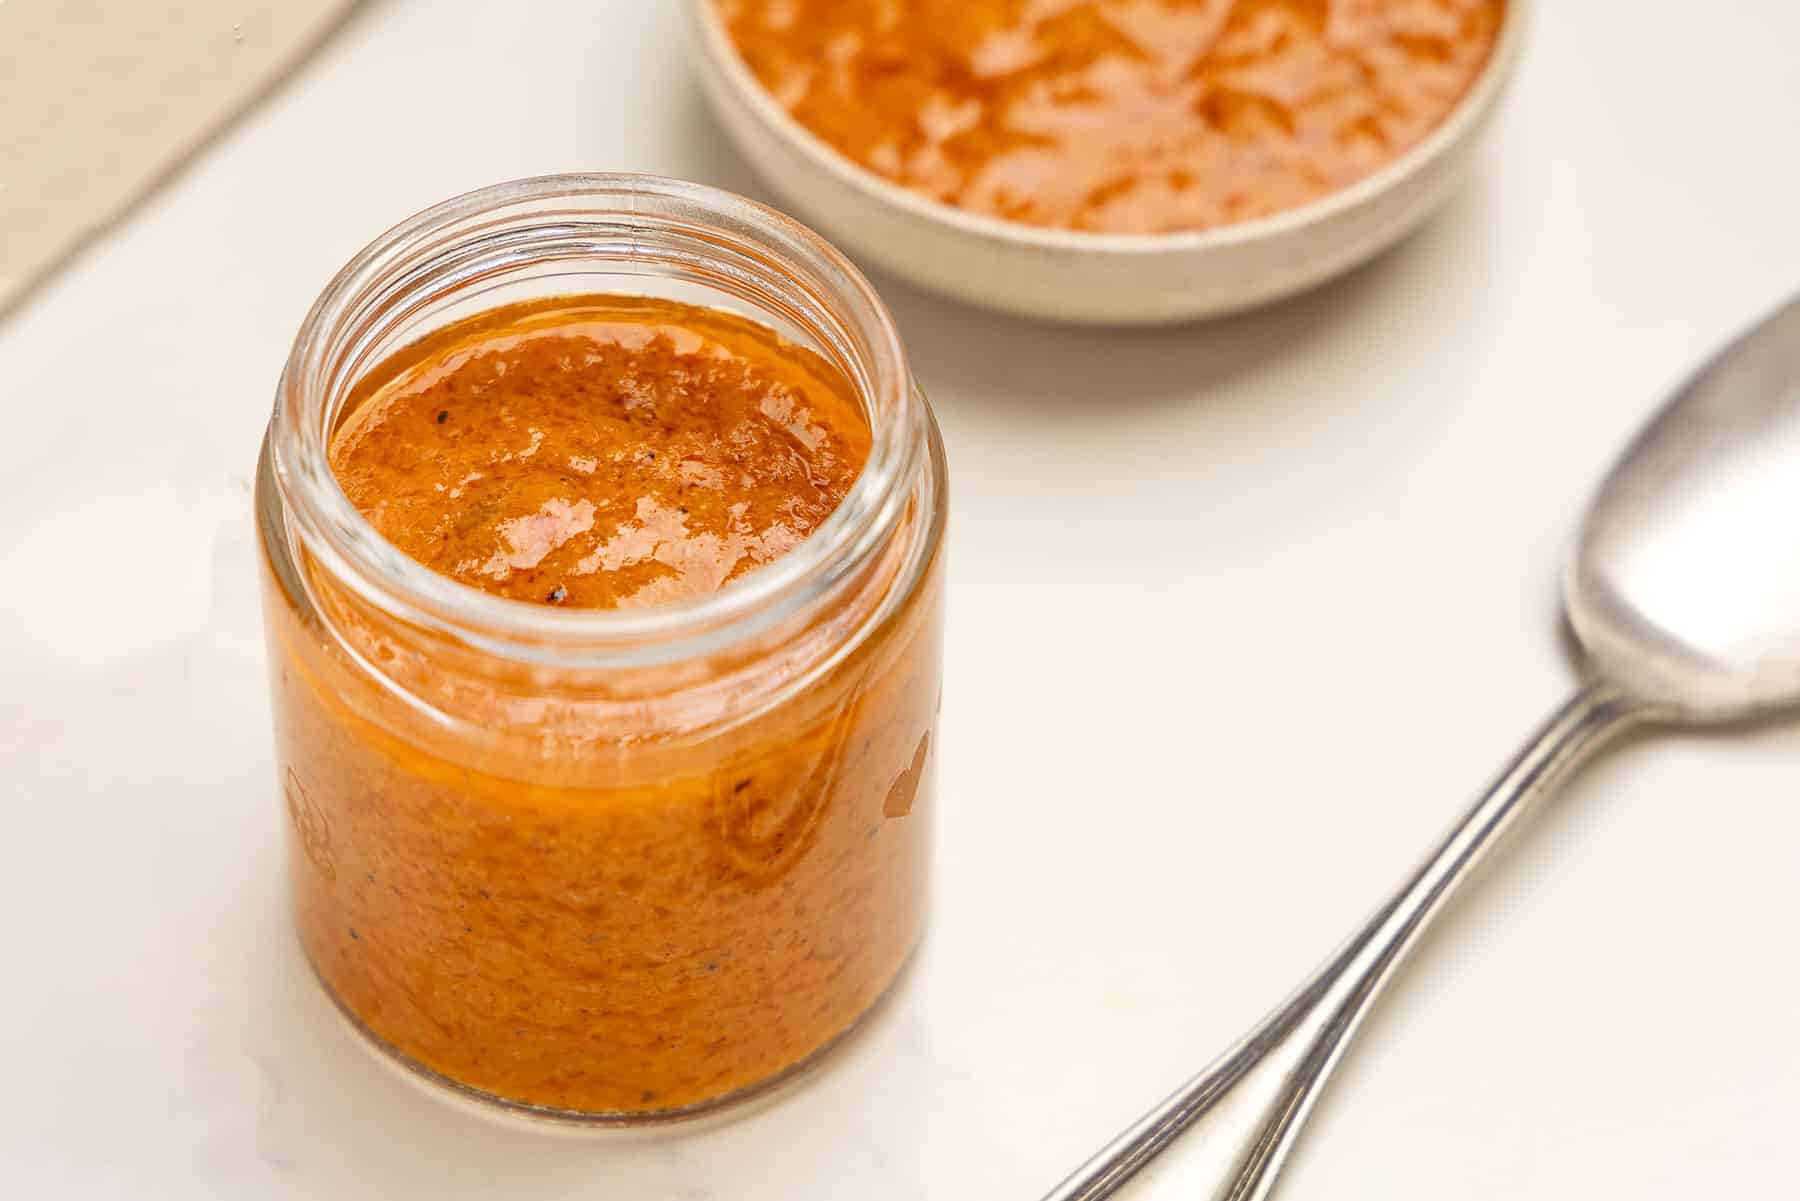 Garlic and roasted pepper sauce.